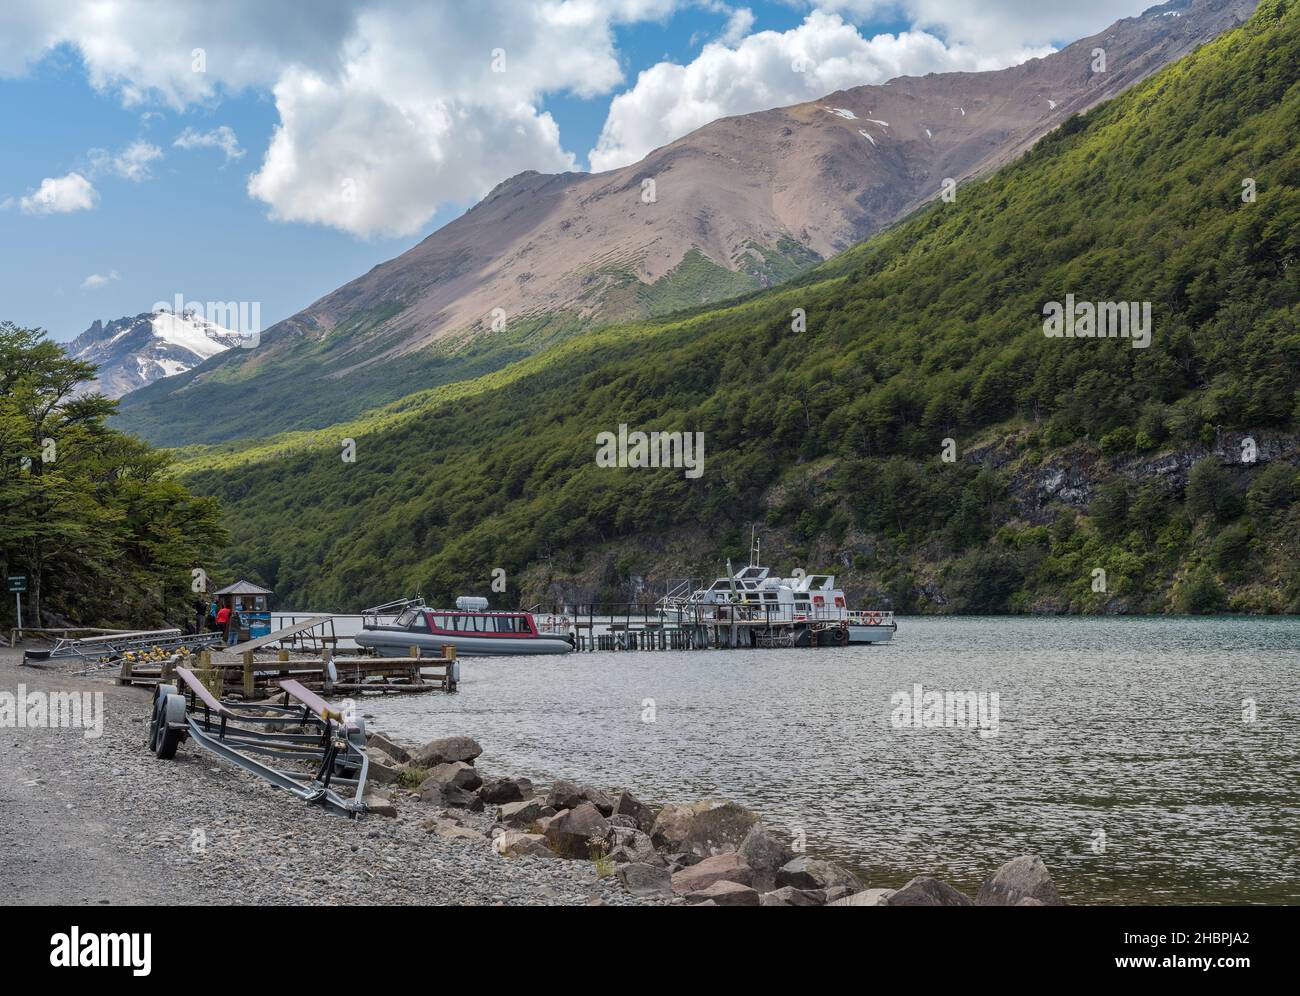 Jetty at Lake Desierto in the north of El Chalten, Argentina Stock Photo